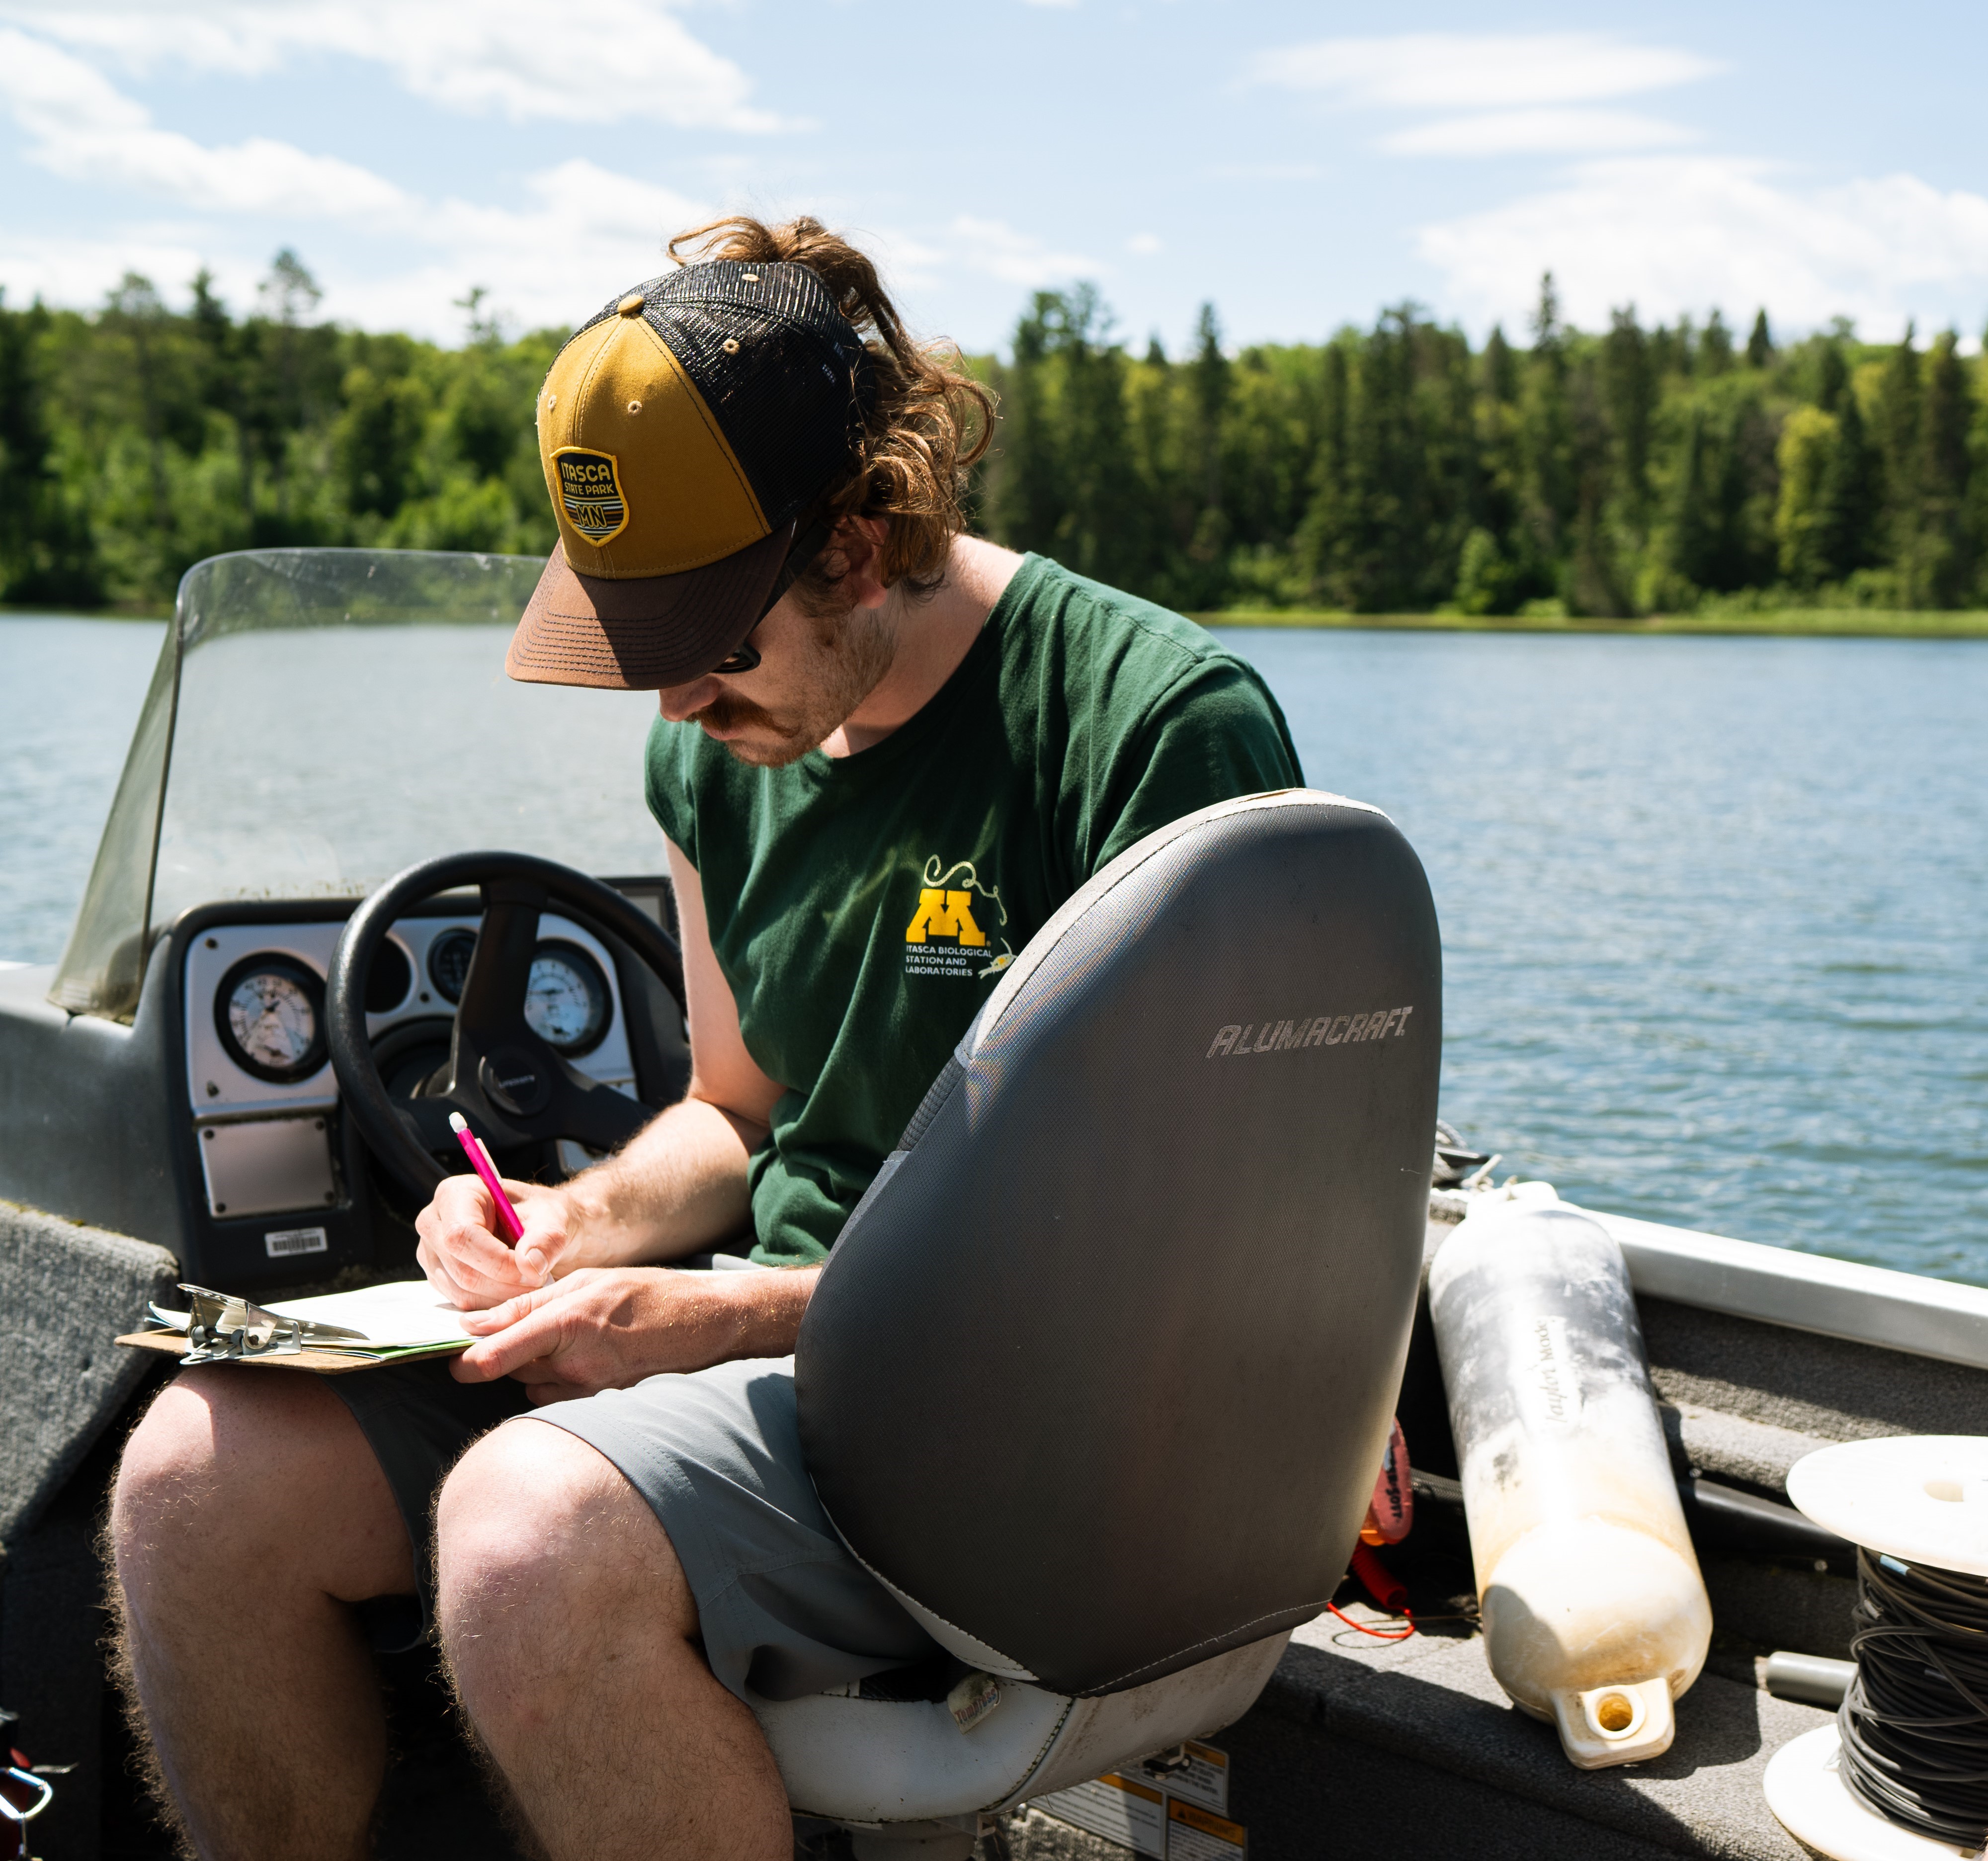 A researcher in a boat, writing on a clip board